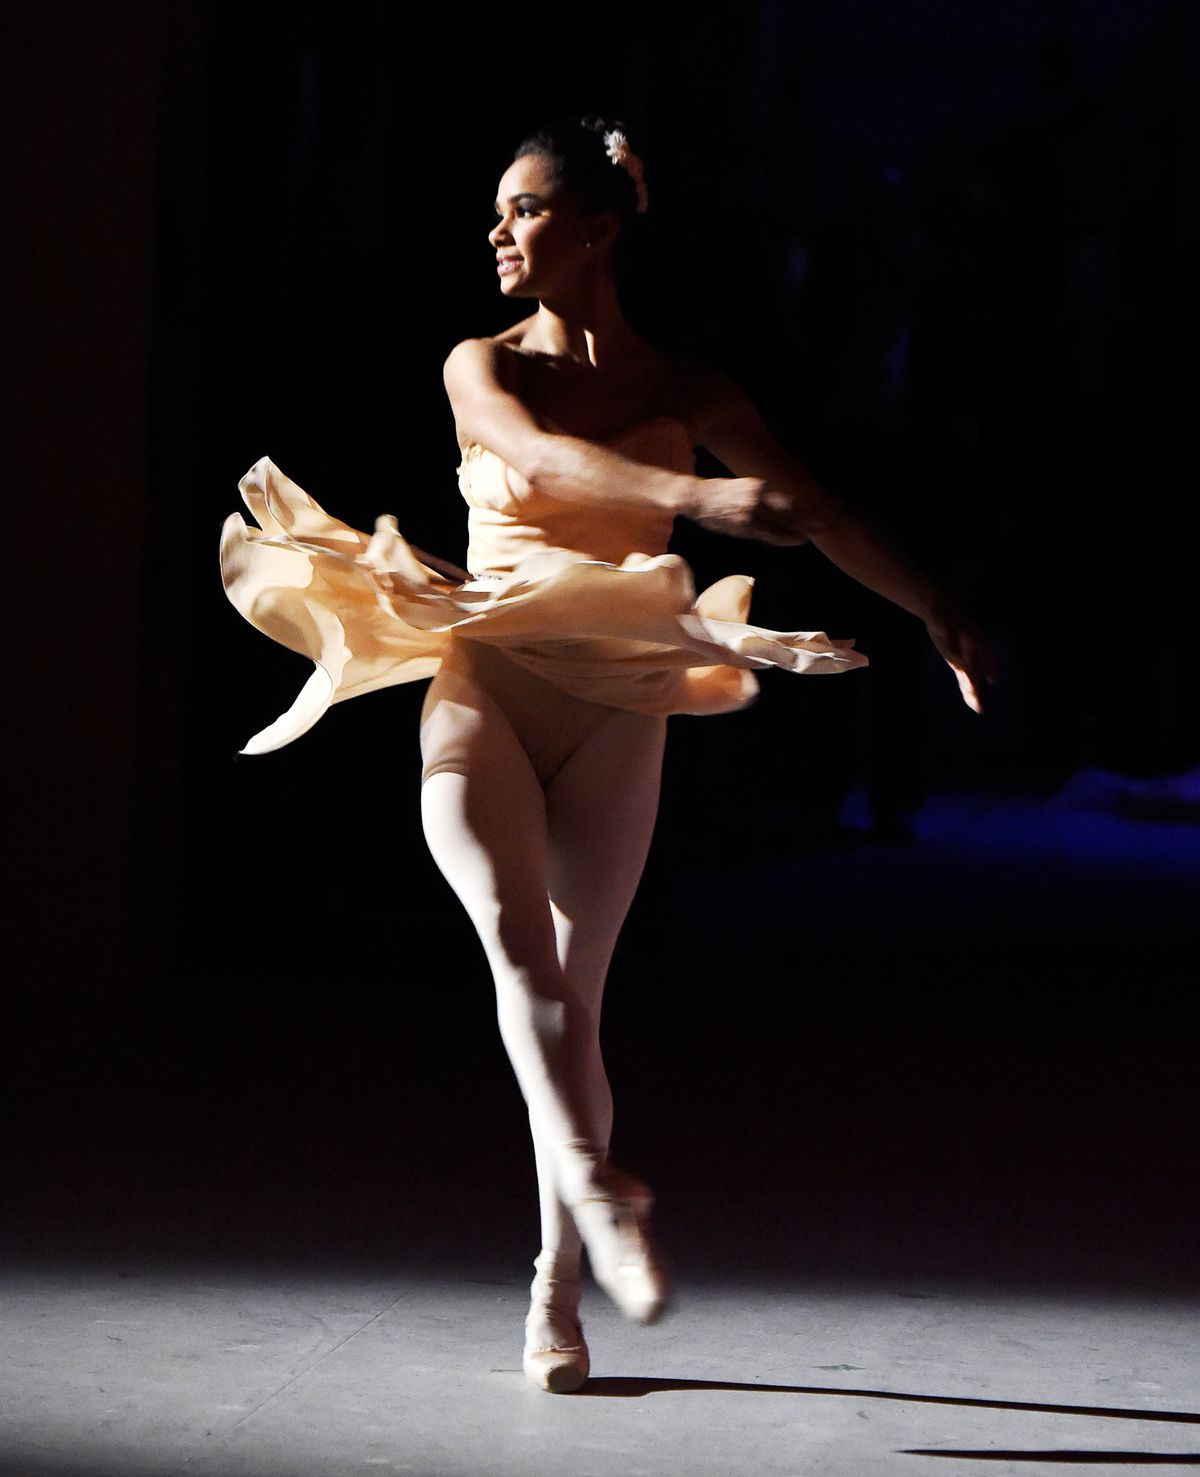 Misty Copeland performs onstage at the 37th Annual Kennedy Center Honors at The John F. Kennedy Center for Performing Arts on December 7, 2014 in Washington, DC.